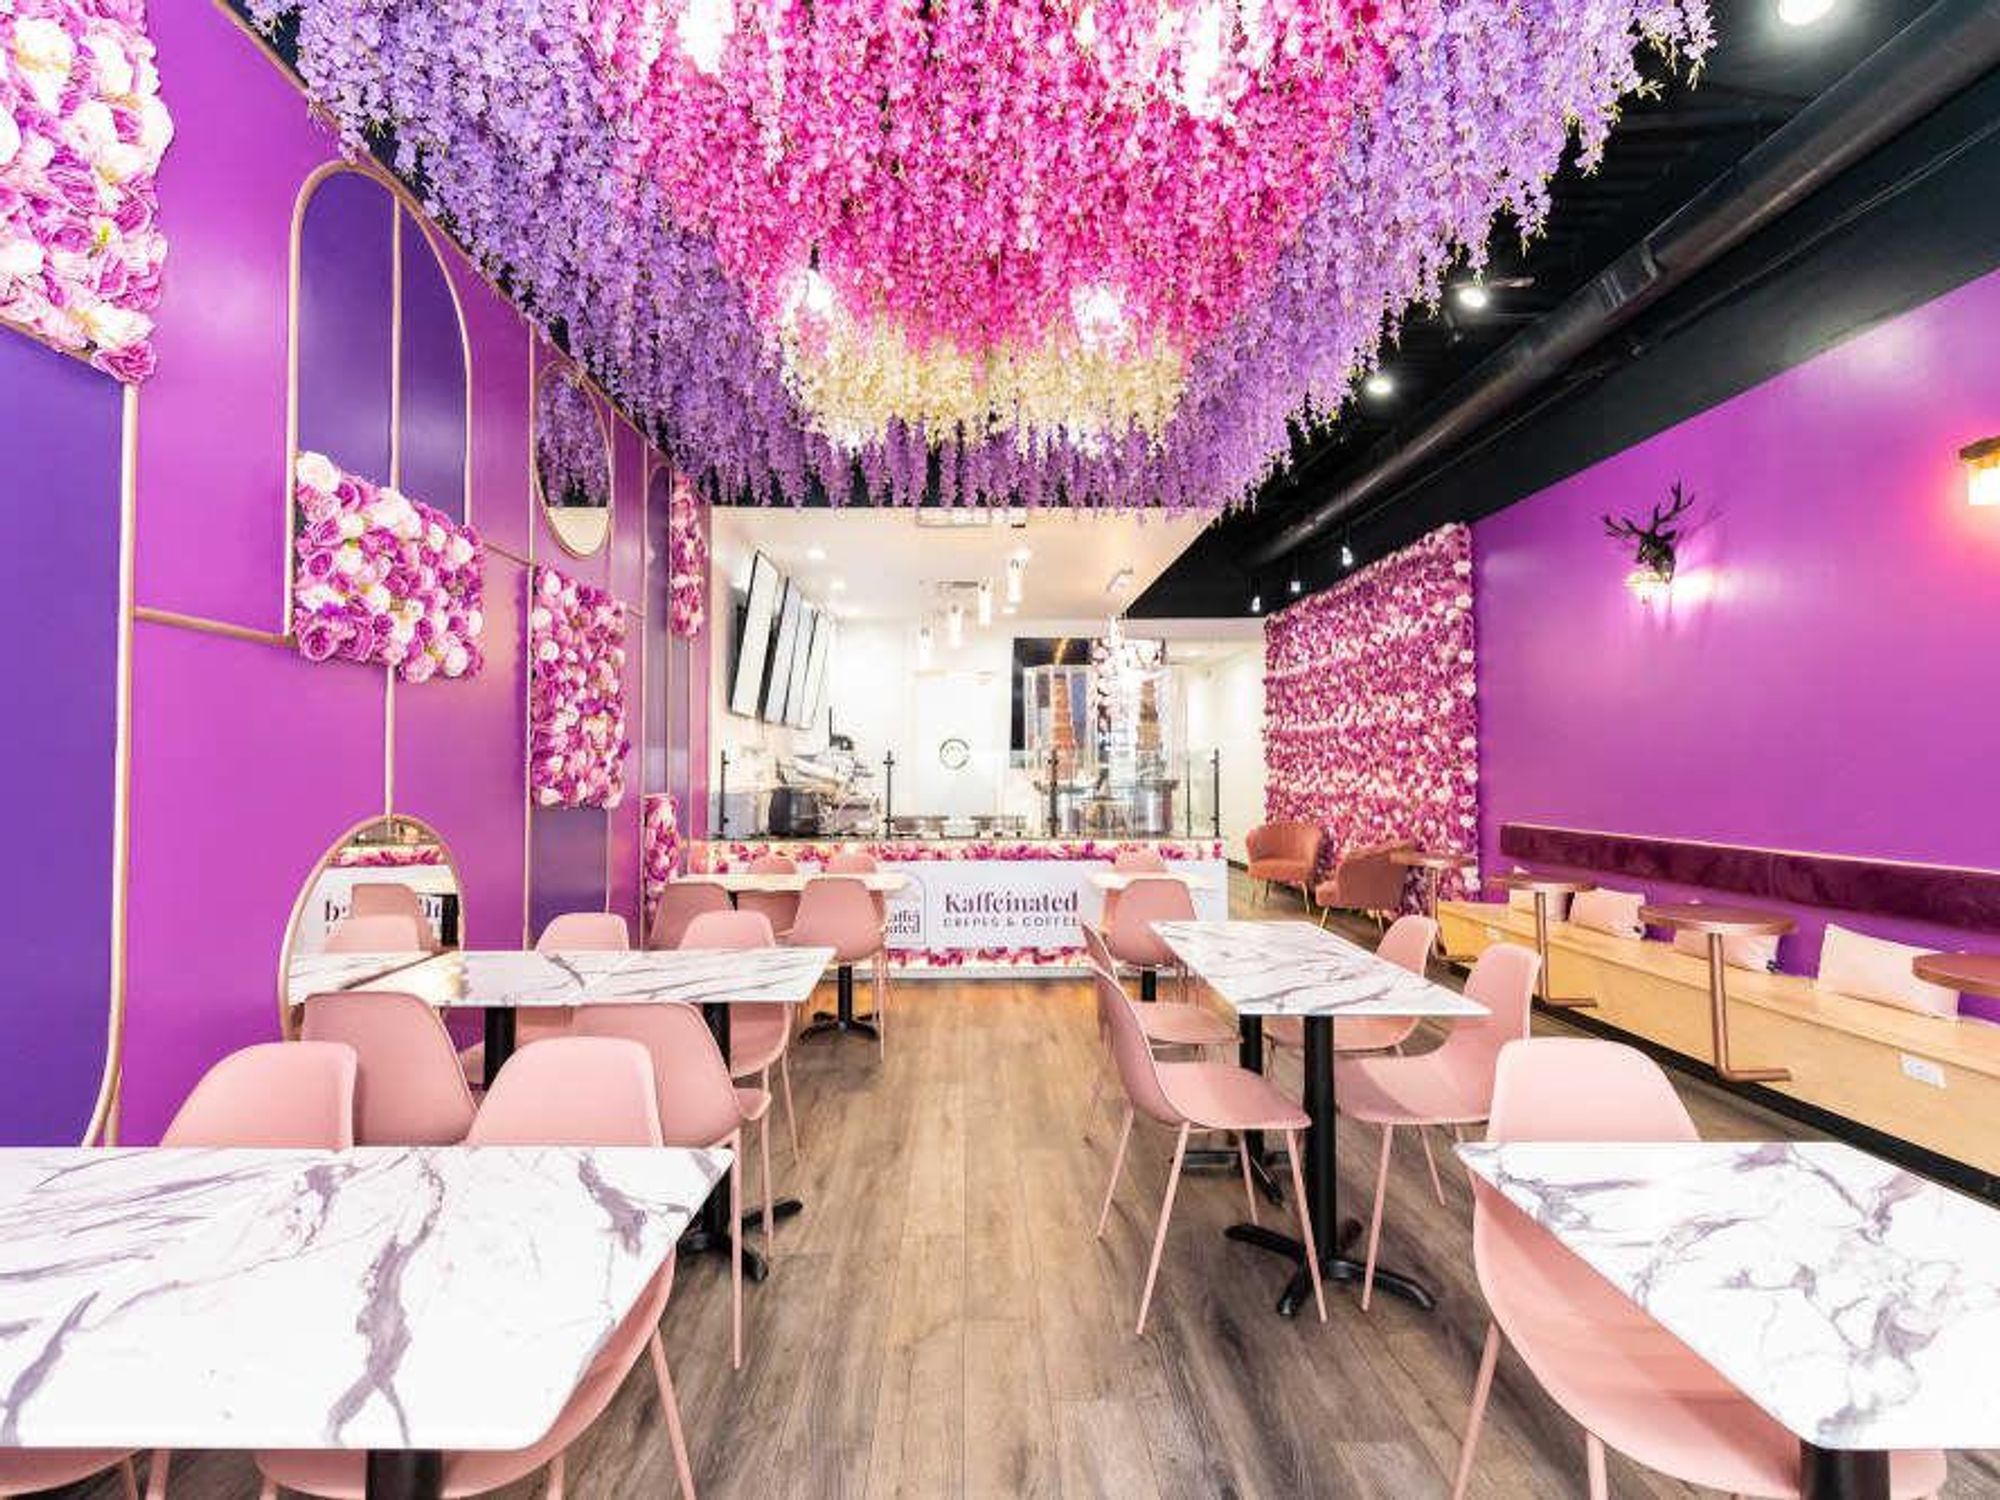 Kaffeinated's colorful and floral interior is ready to perk you up.